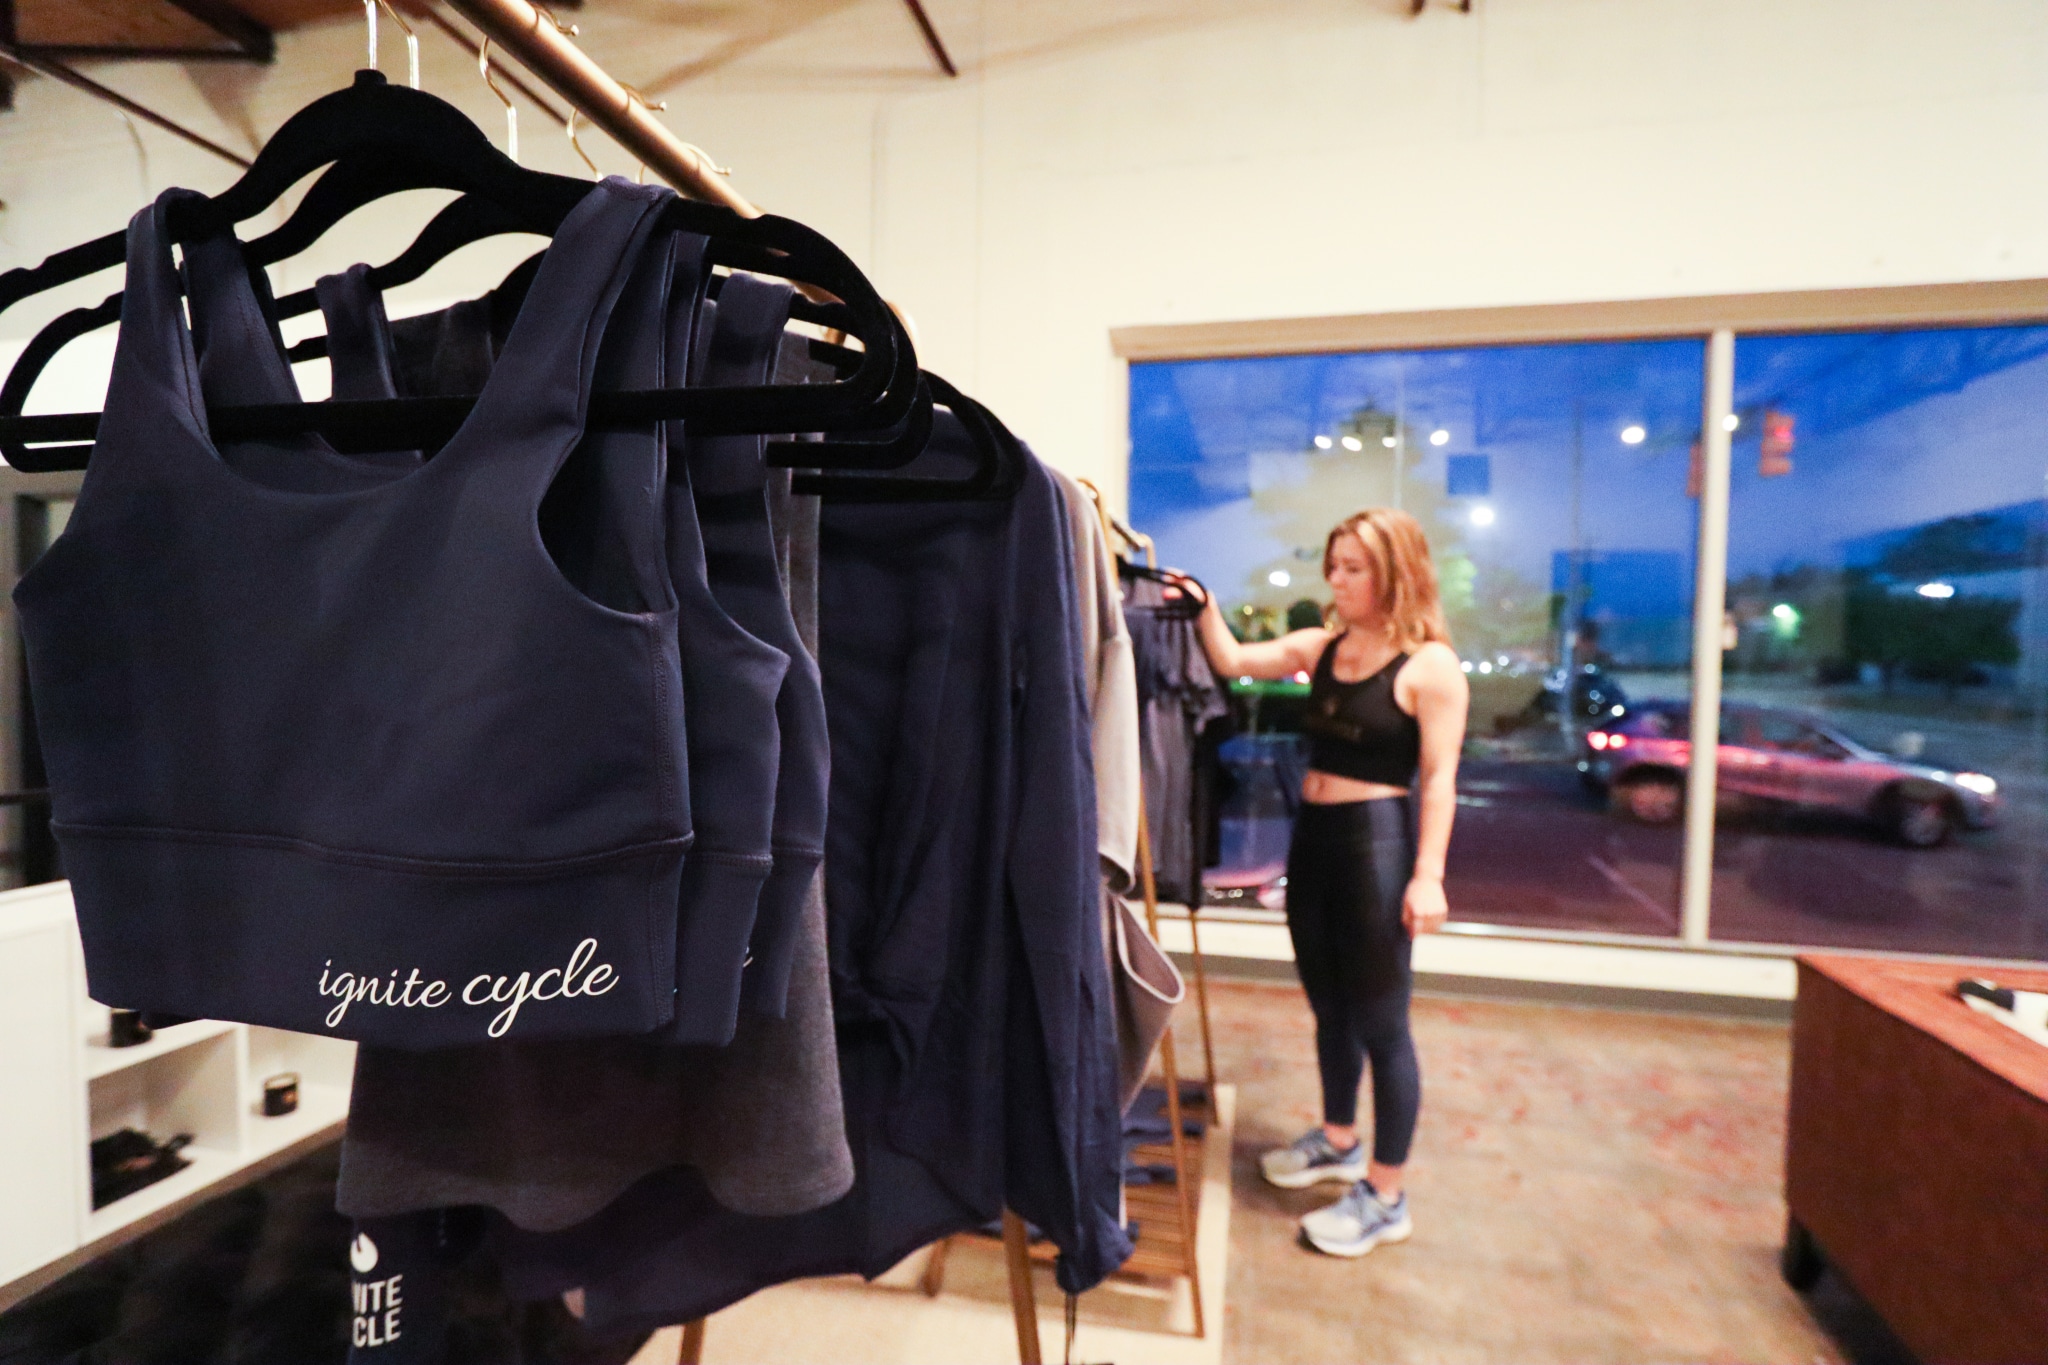 The studio sells great branded apparel specifically for indoor cycling. Or brunch. Athleisure wear knows no bounds.